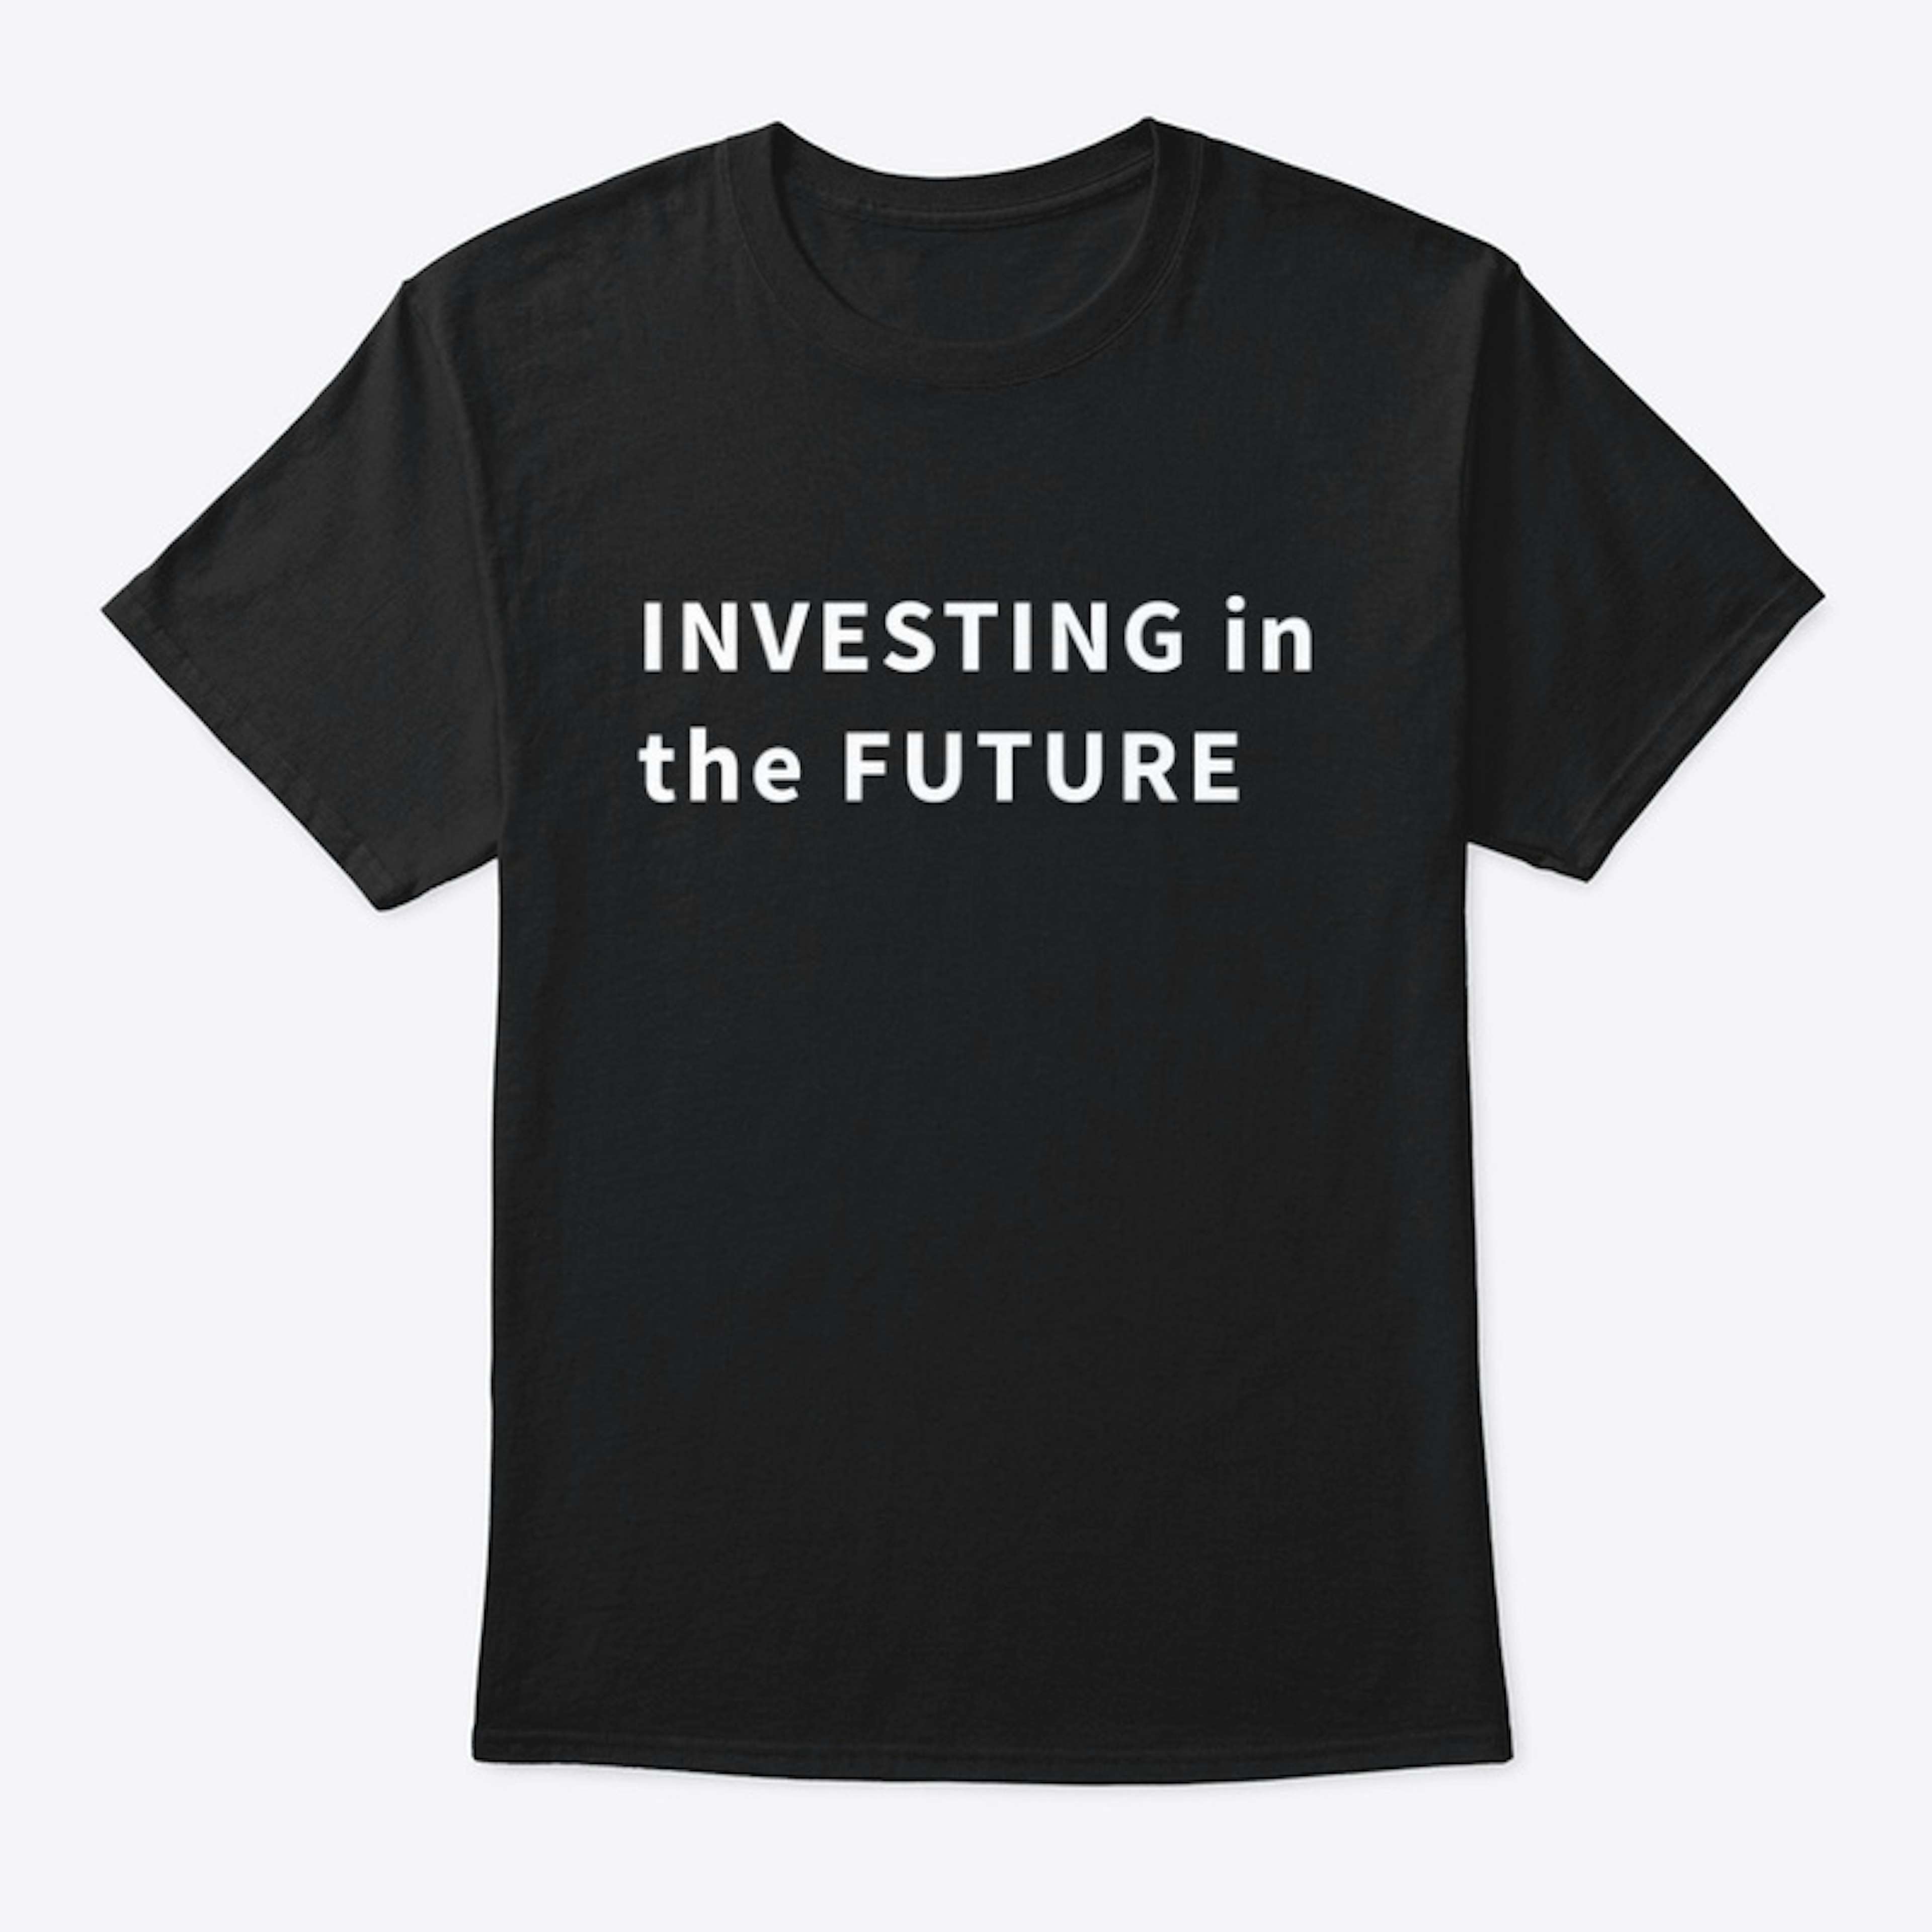 Investing in the Future Tee